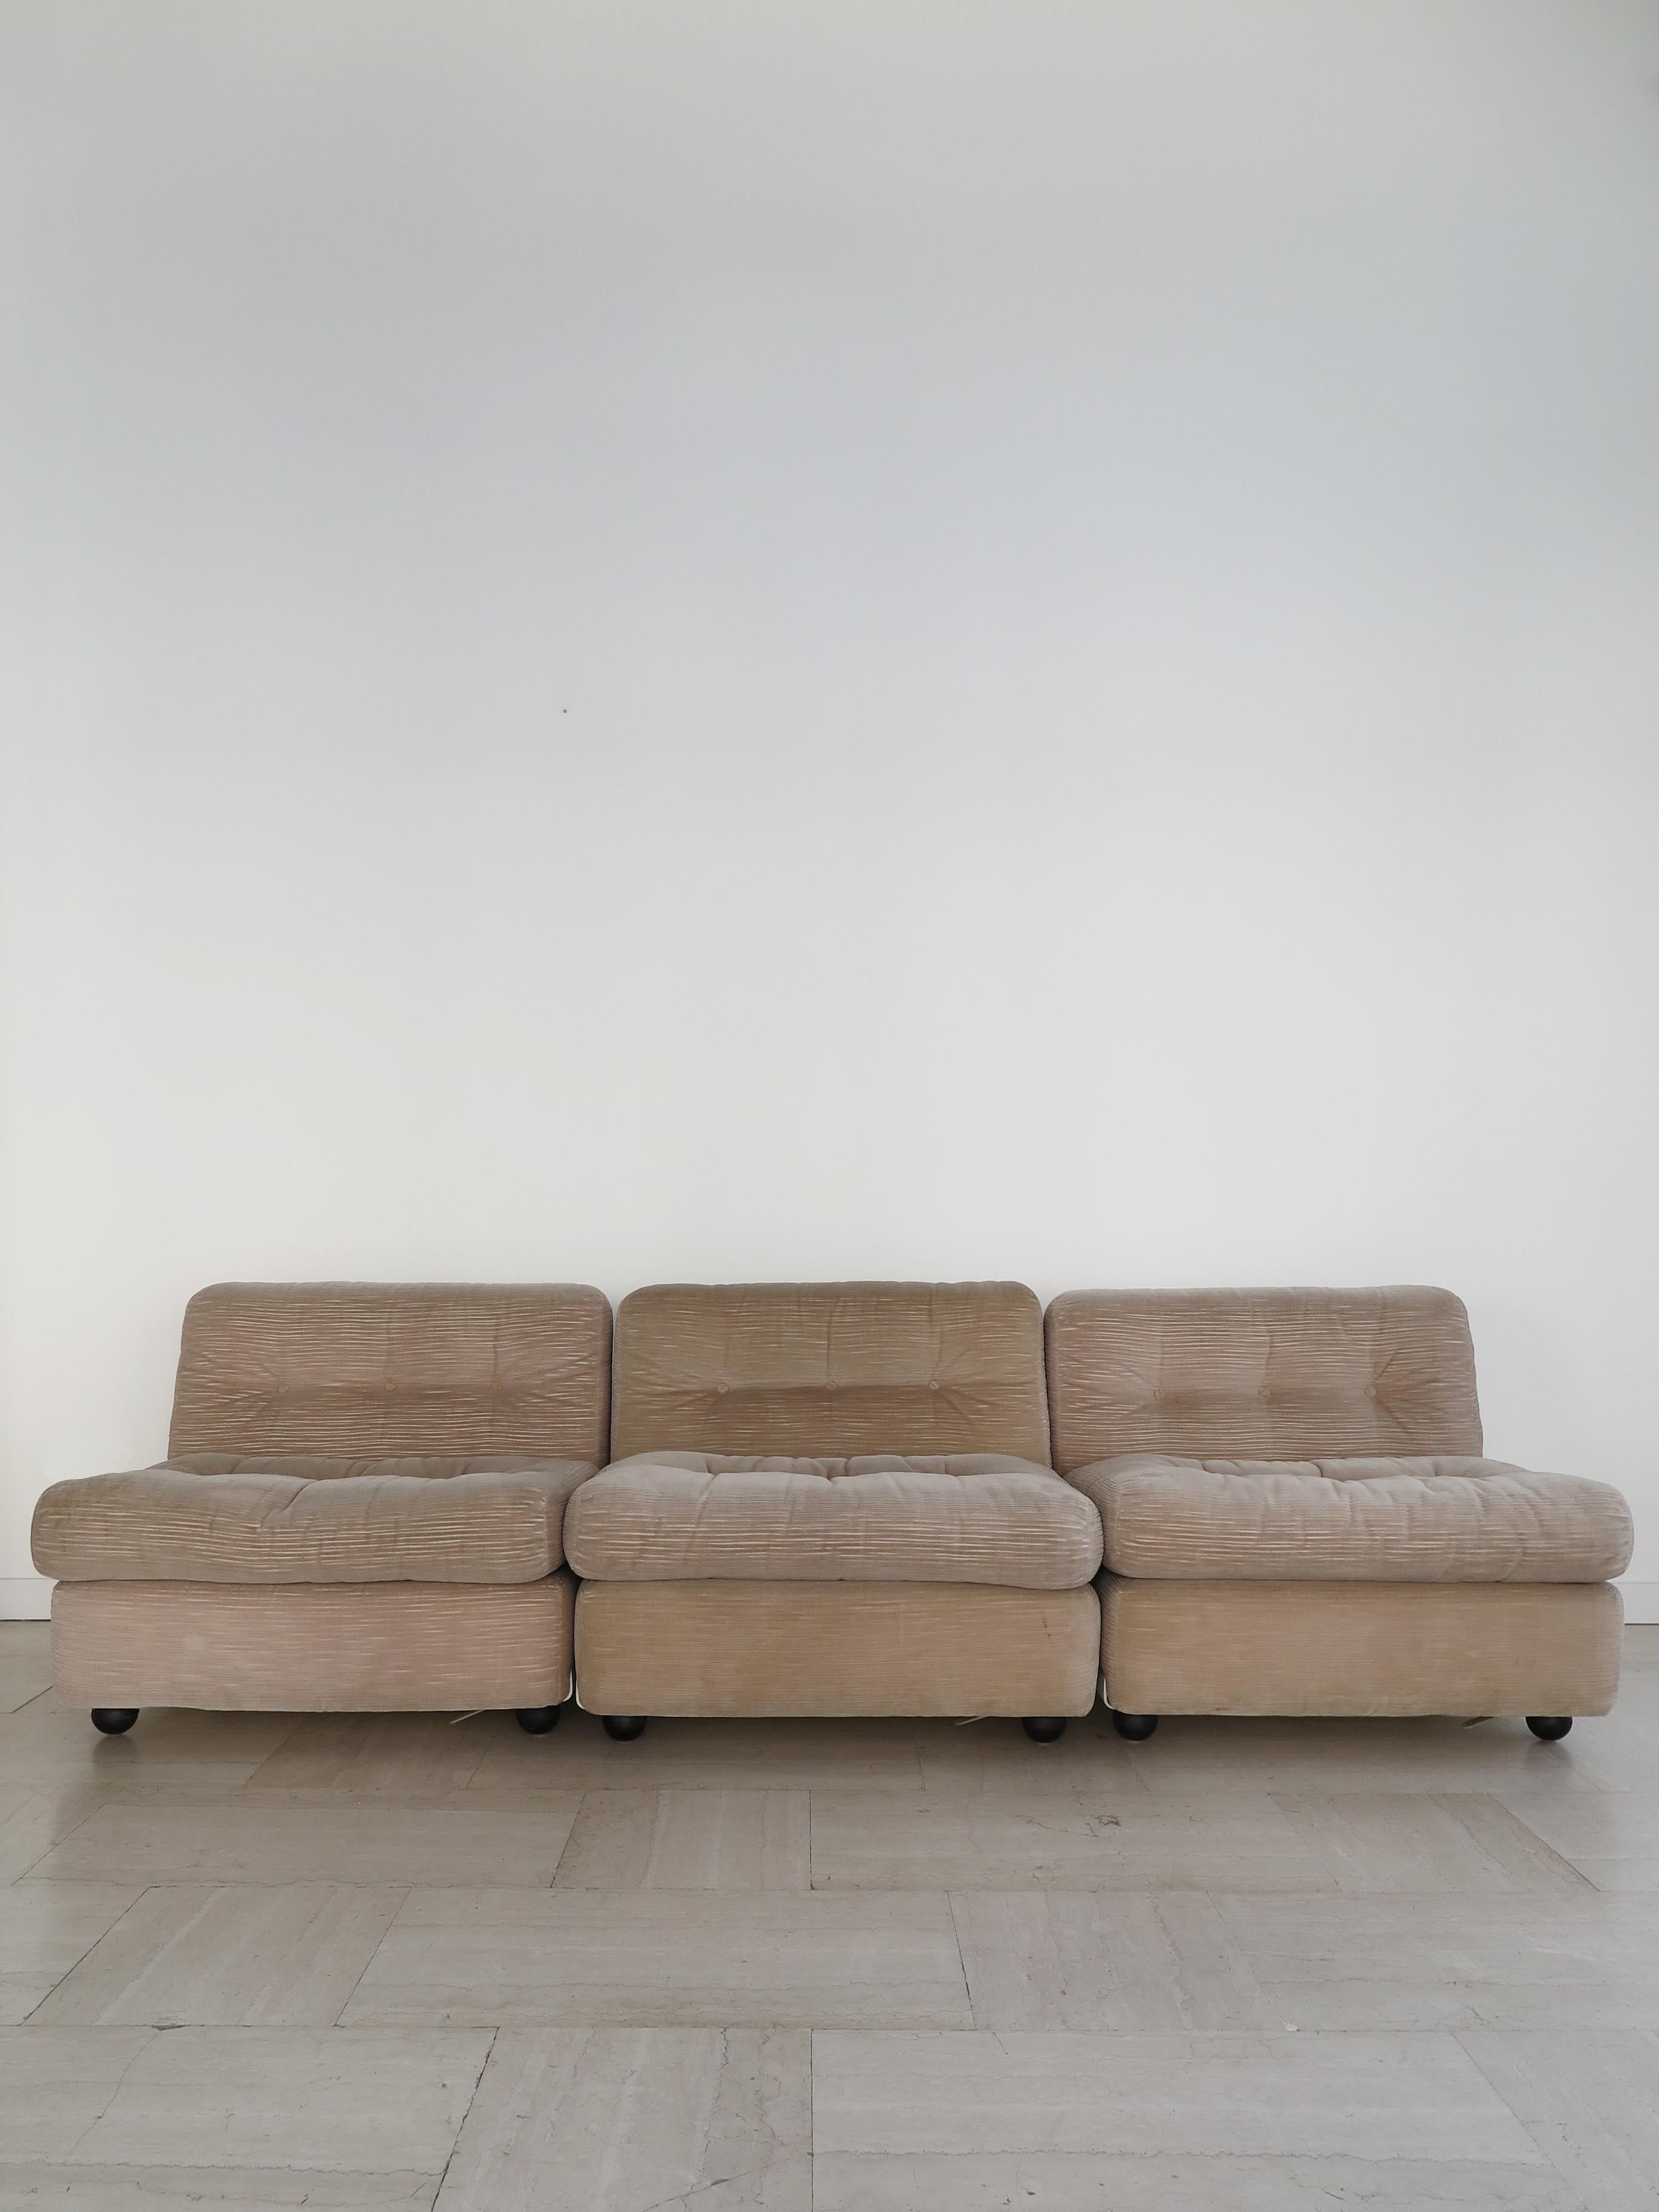 Italian modular armchairs sofa model Amanta set of three designed by Mario Bellini and produced by C&B Italia from 1966, with corduroy upholstery and fibreglass frame, original manufacturer’s label and relief print, made in 1973.
Awarded the